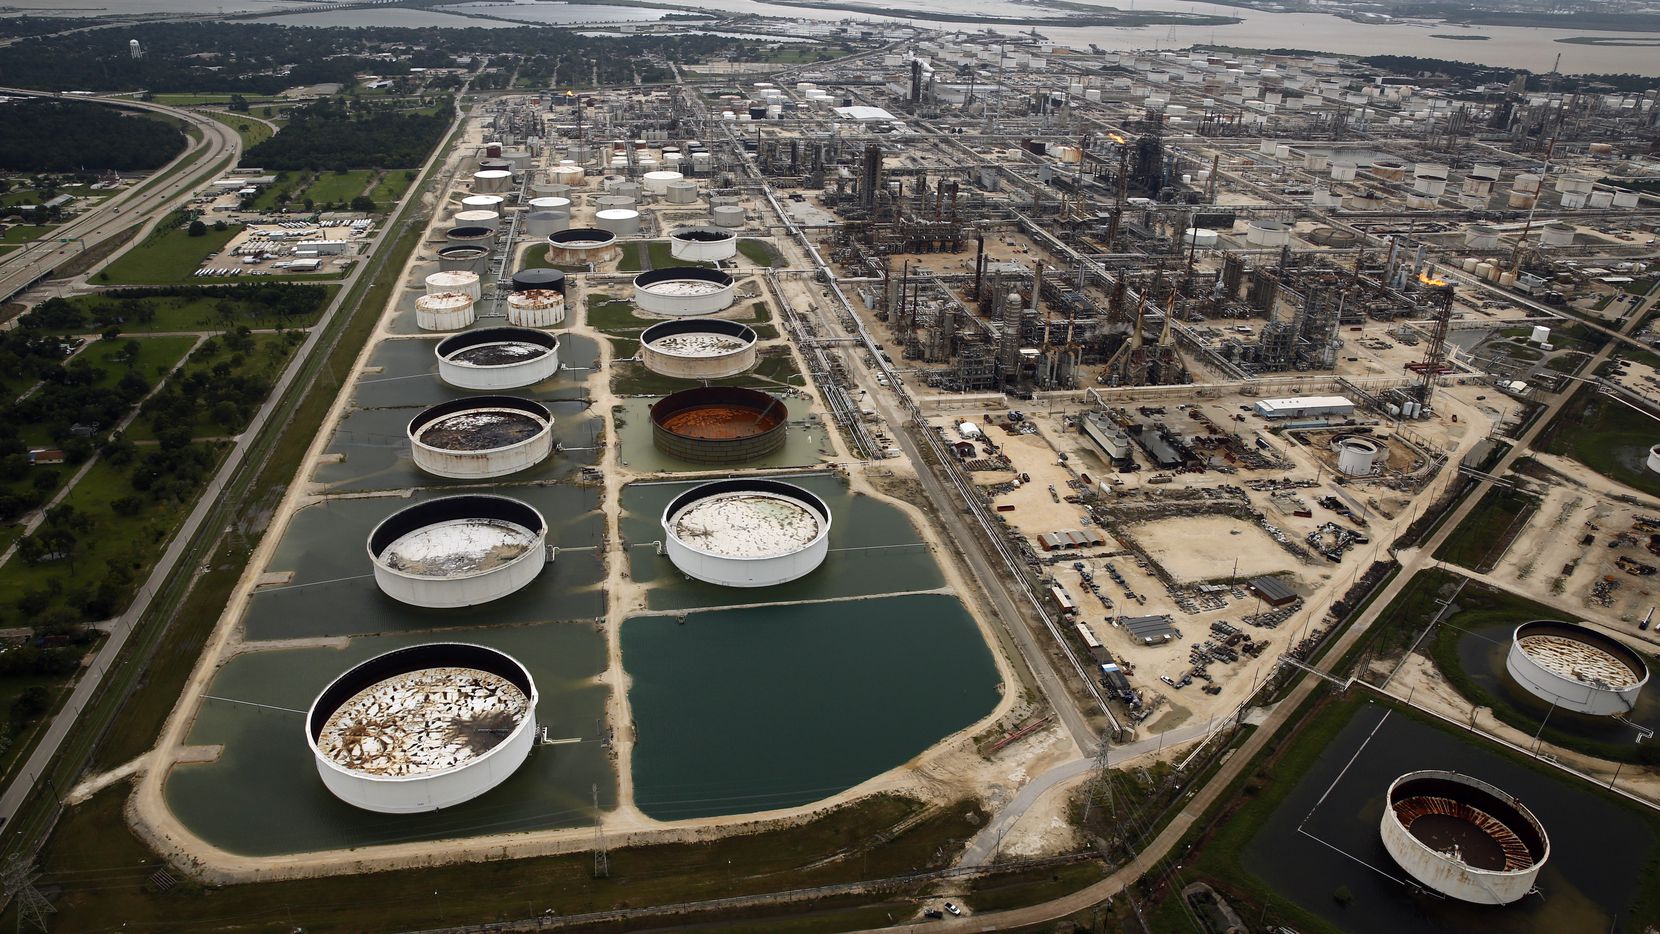 It’ll take weeks for Exxon, Marathon and Total to repair and restart damaged Texas refineries